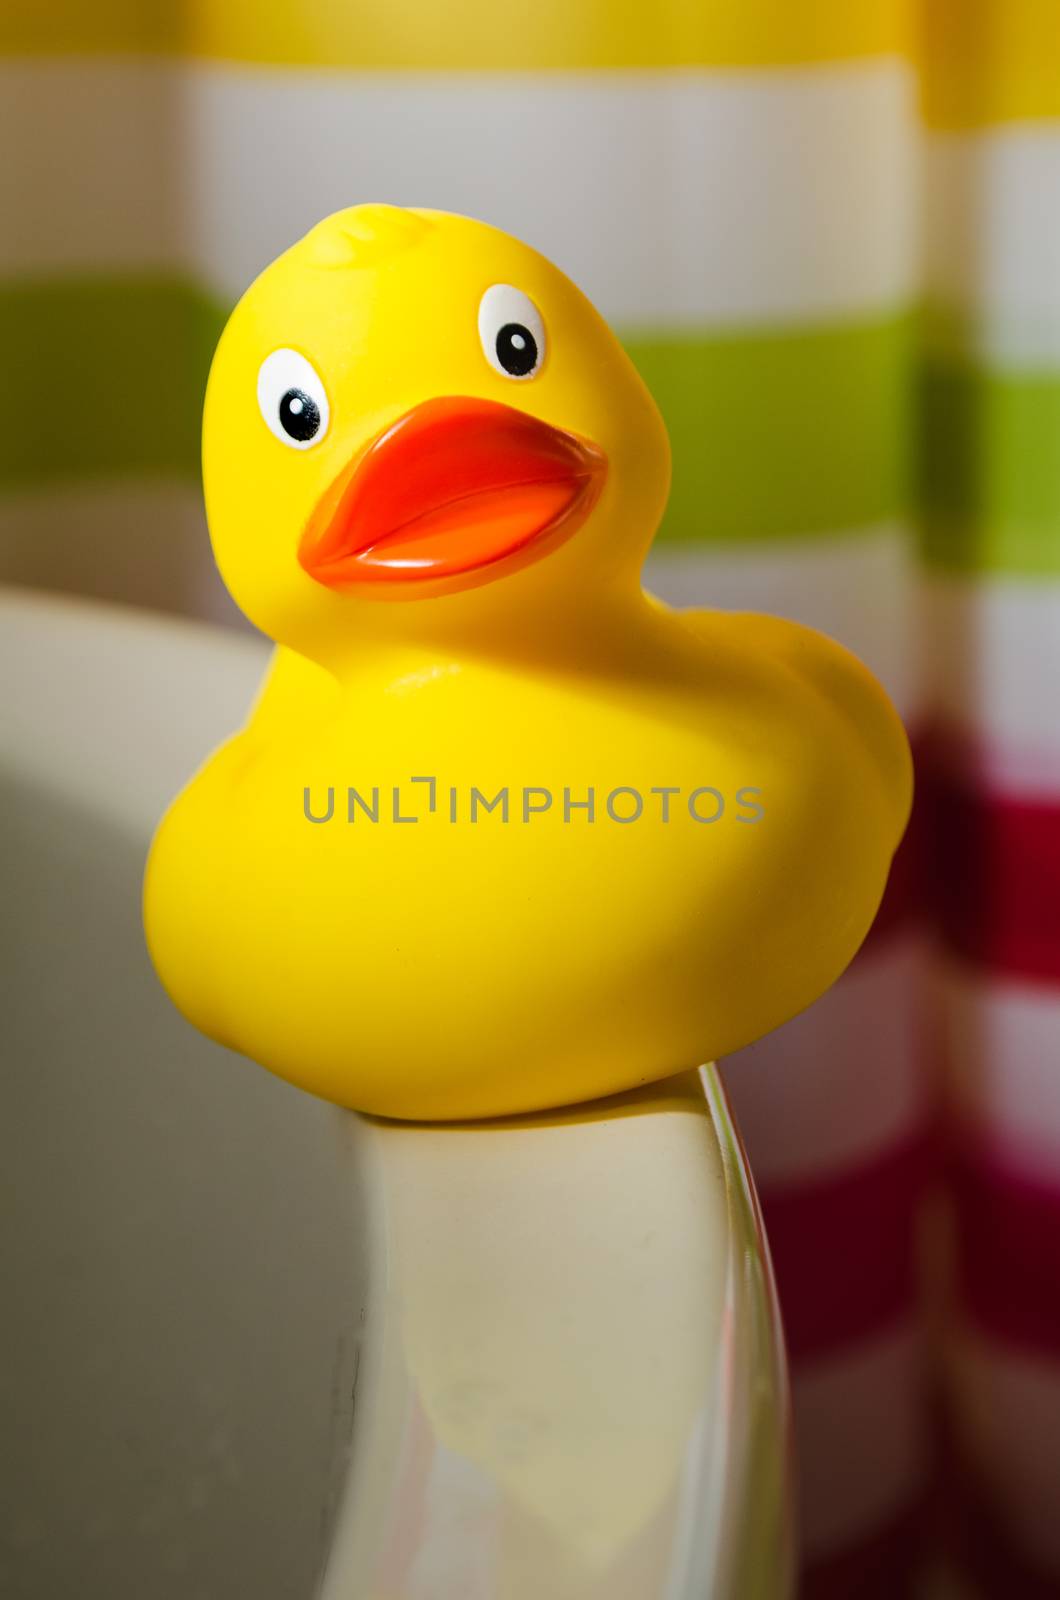 kids toy, yellow rubber duck in a bathroom with colorful shower curtain in the background